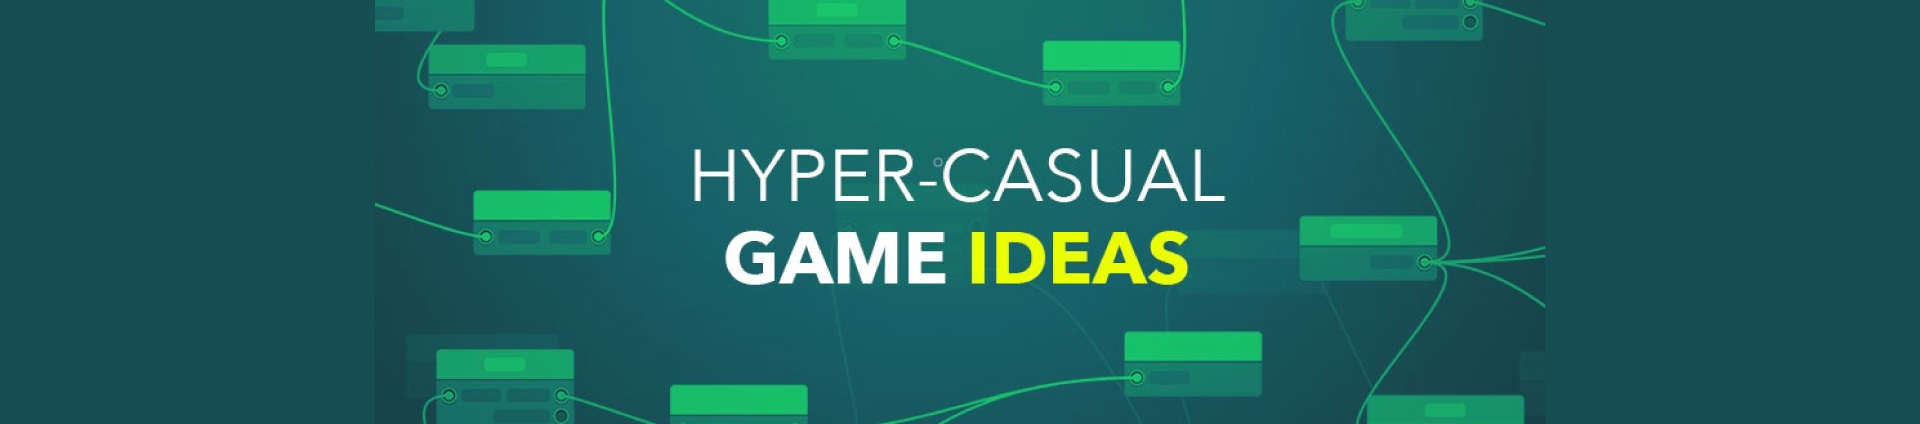 Hyper Casual Game Trends